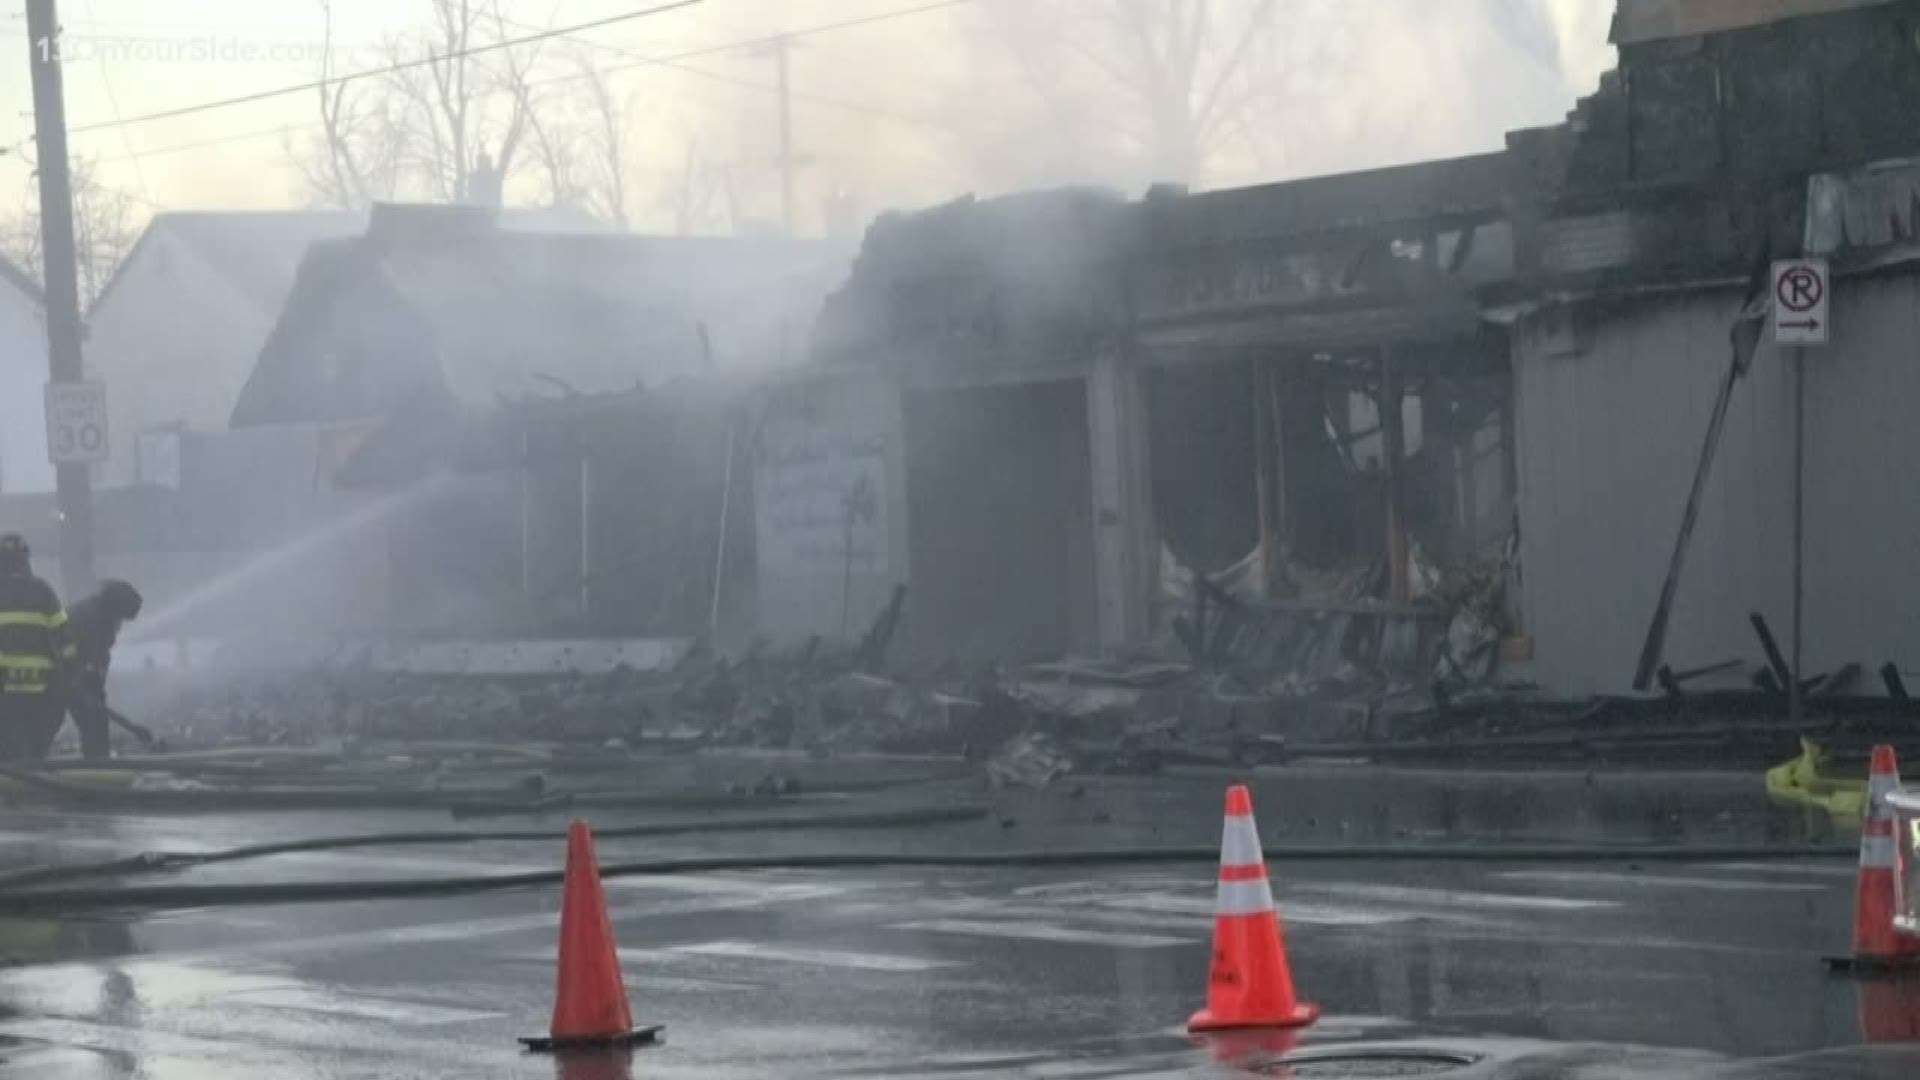 A multi-use building caught fire in Grand Rapids Tuesday. A portion of it collapsed from the damage.